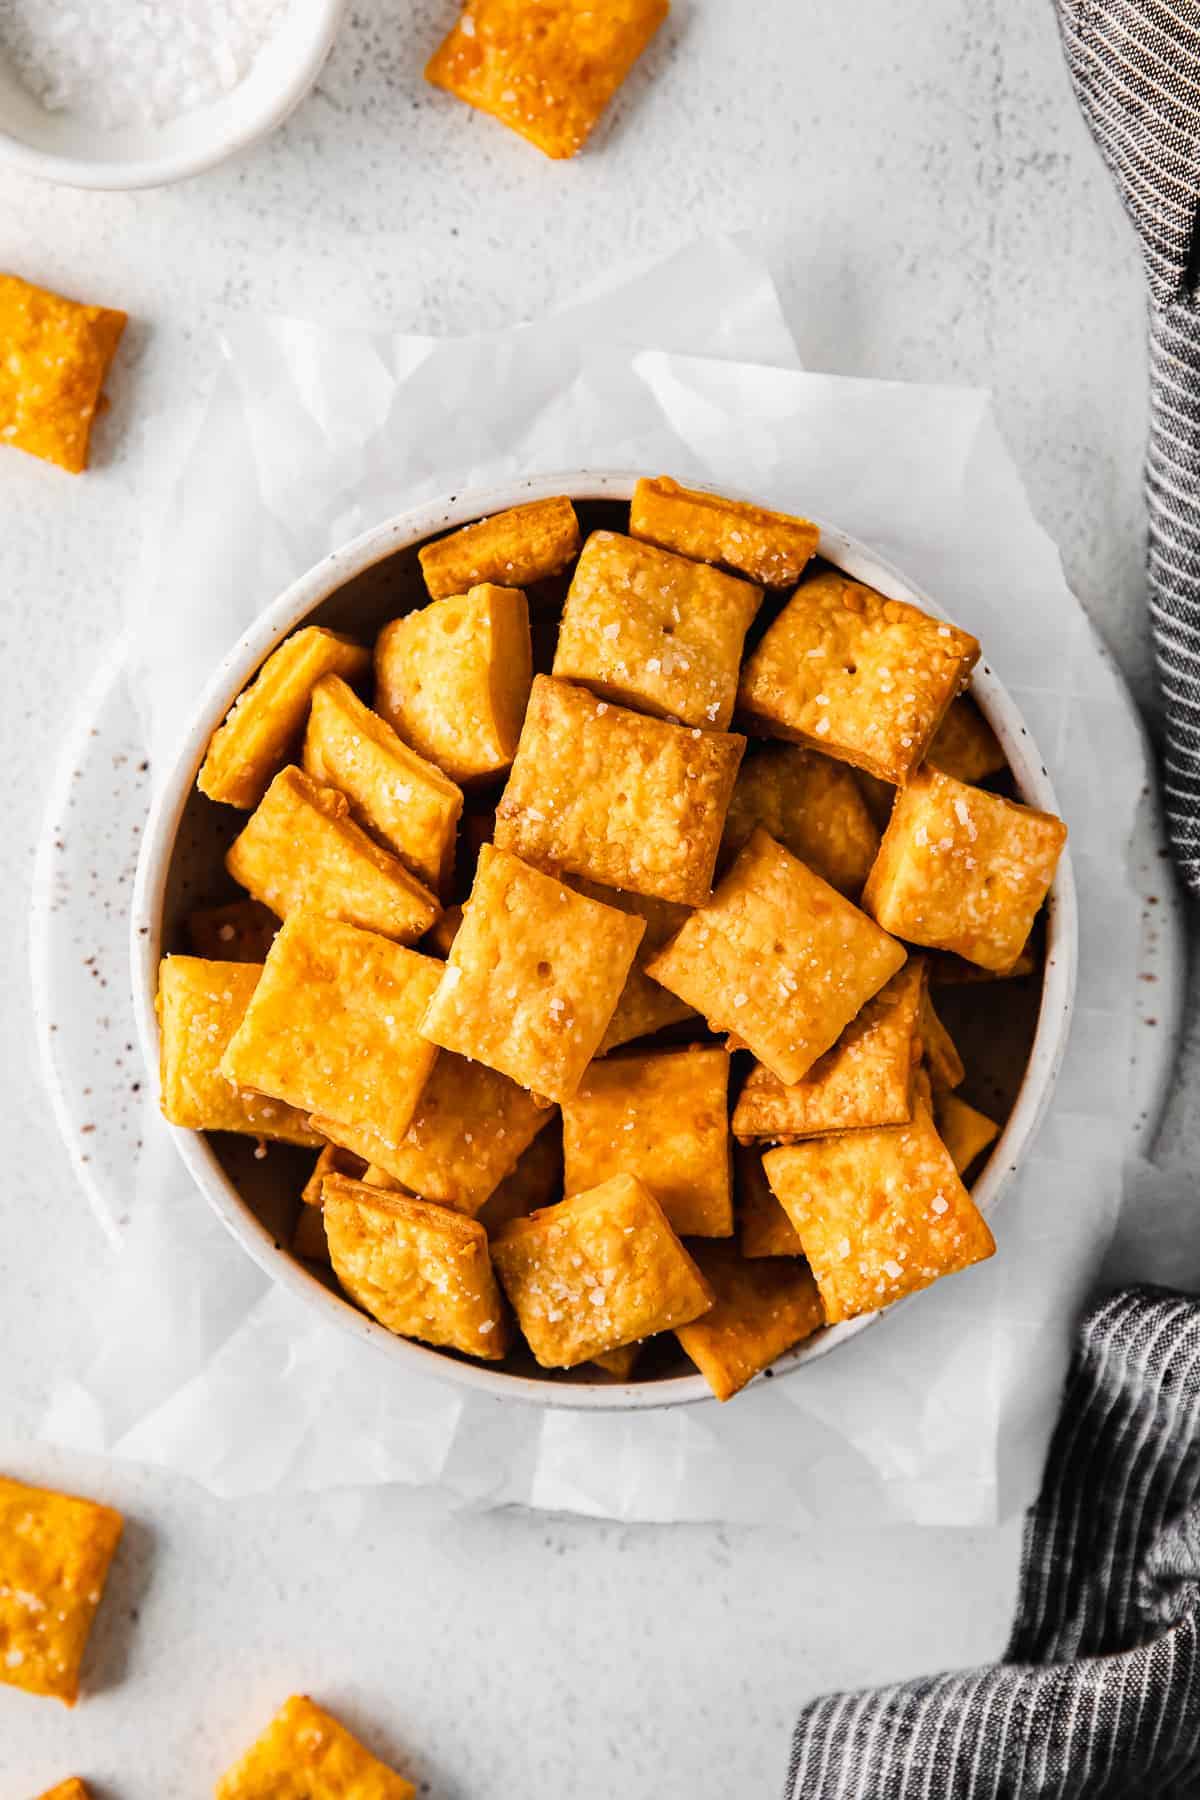 Homemade Cheez Its (real cheddar cheese) - The Cheese Knees